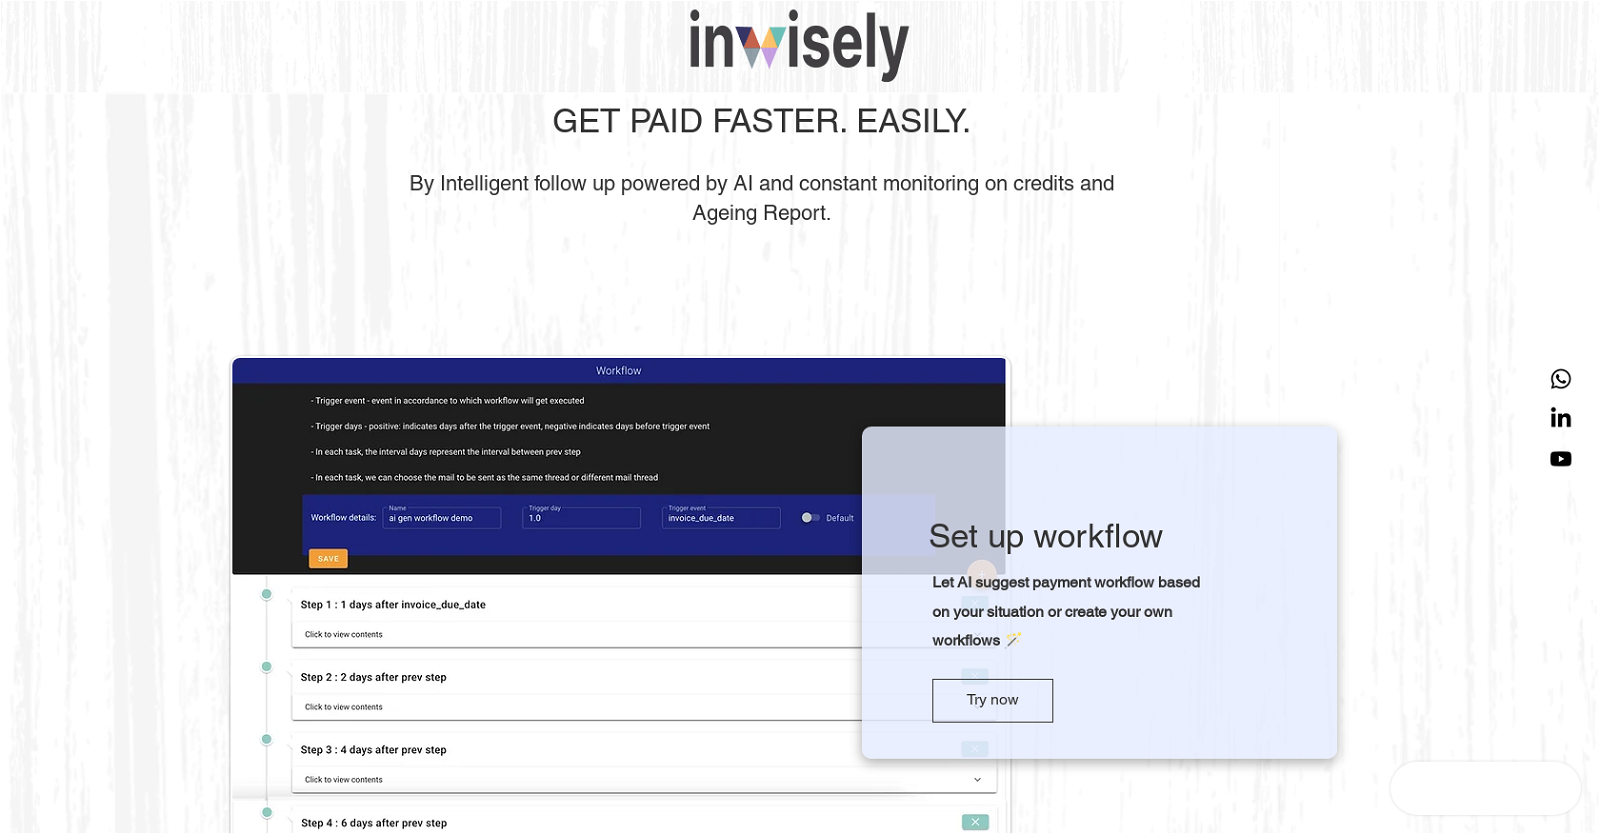 Inwisely